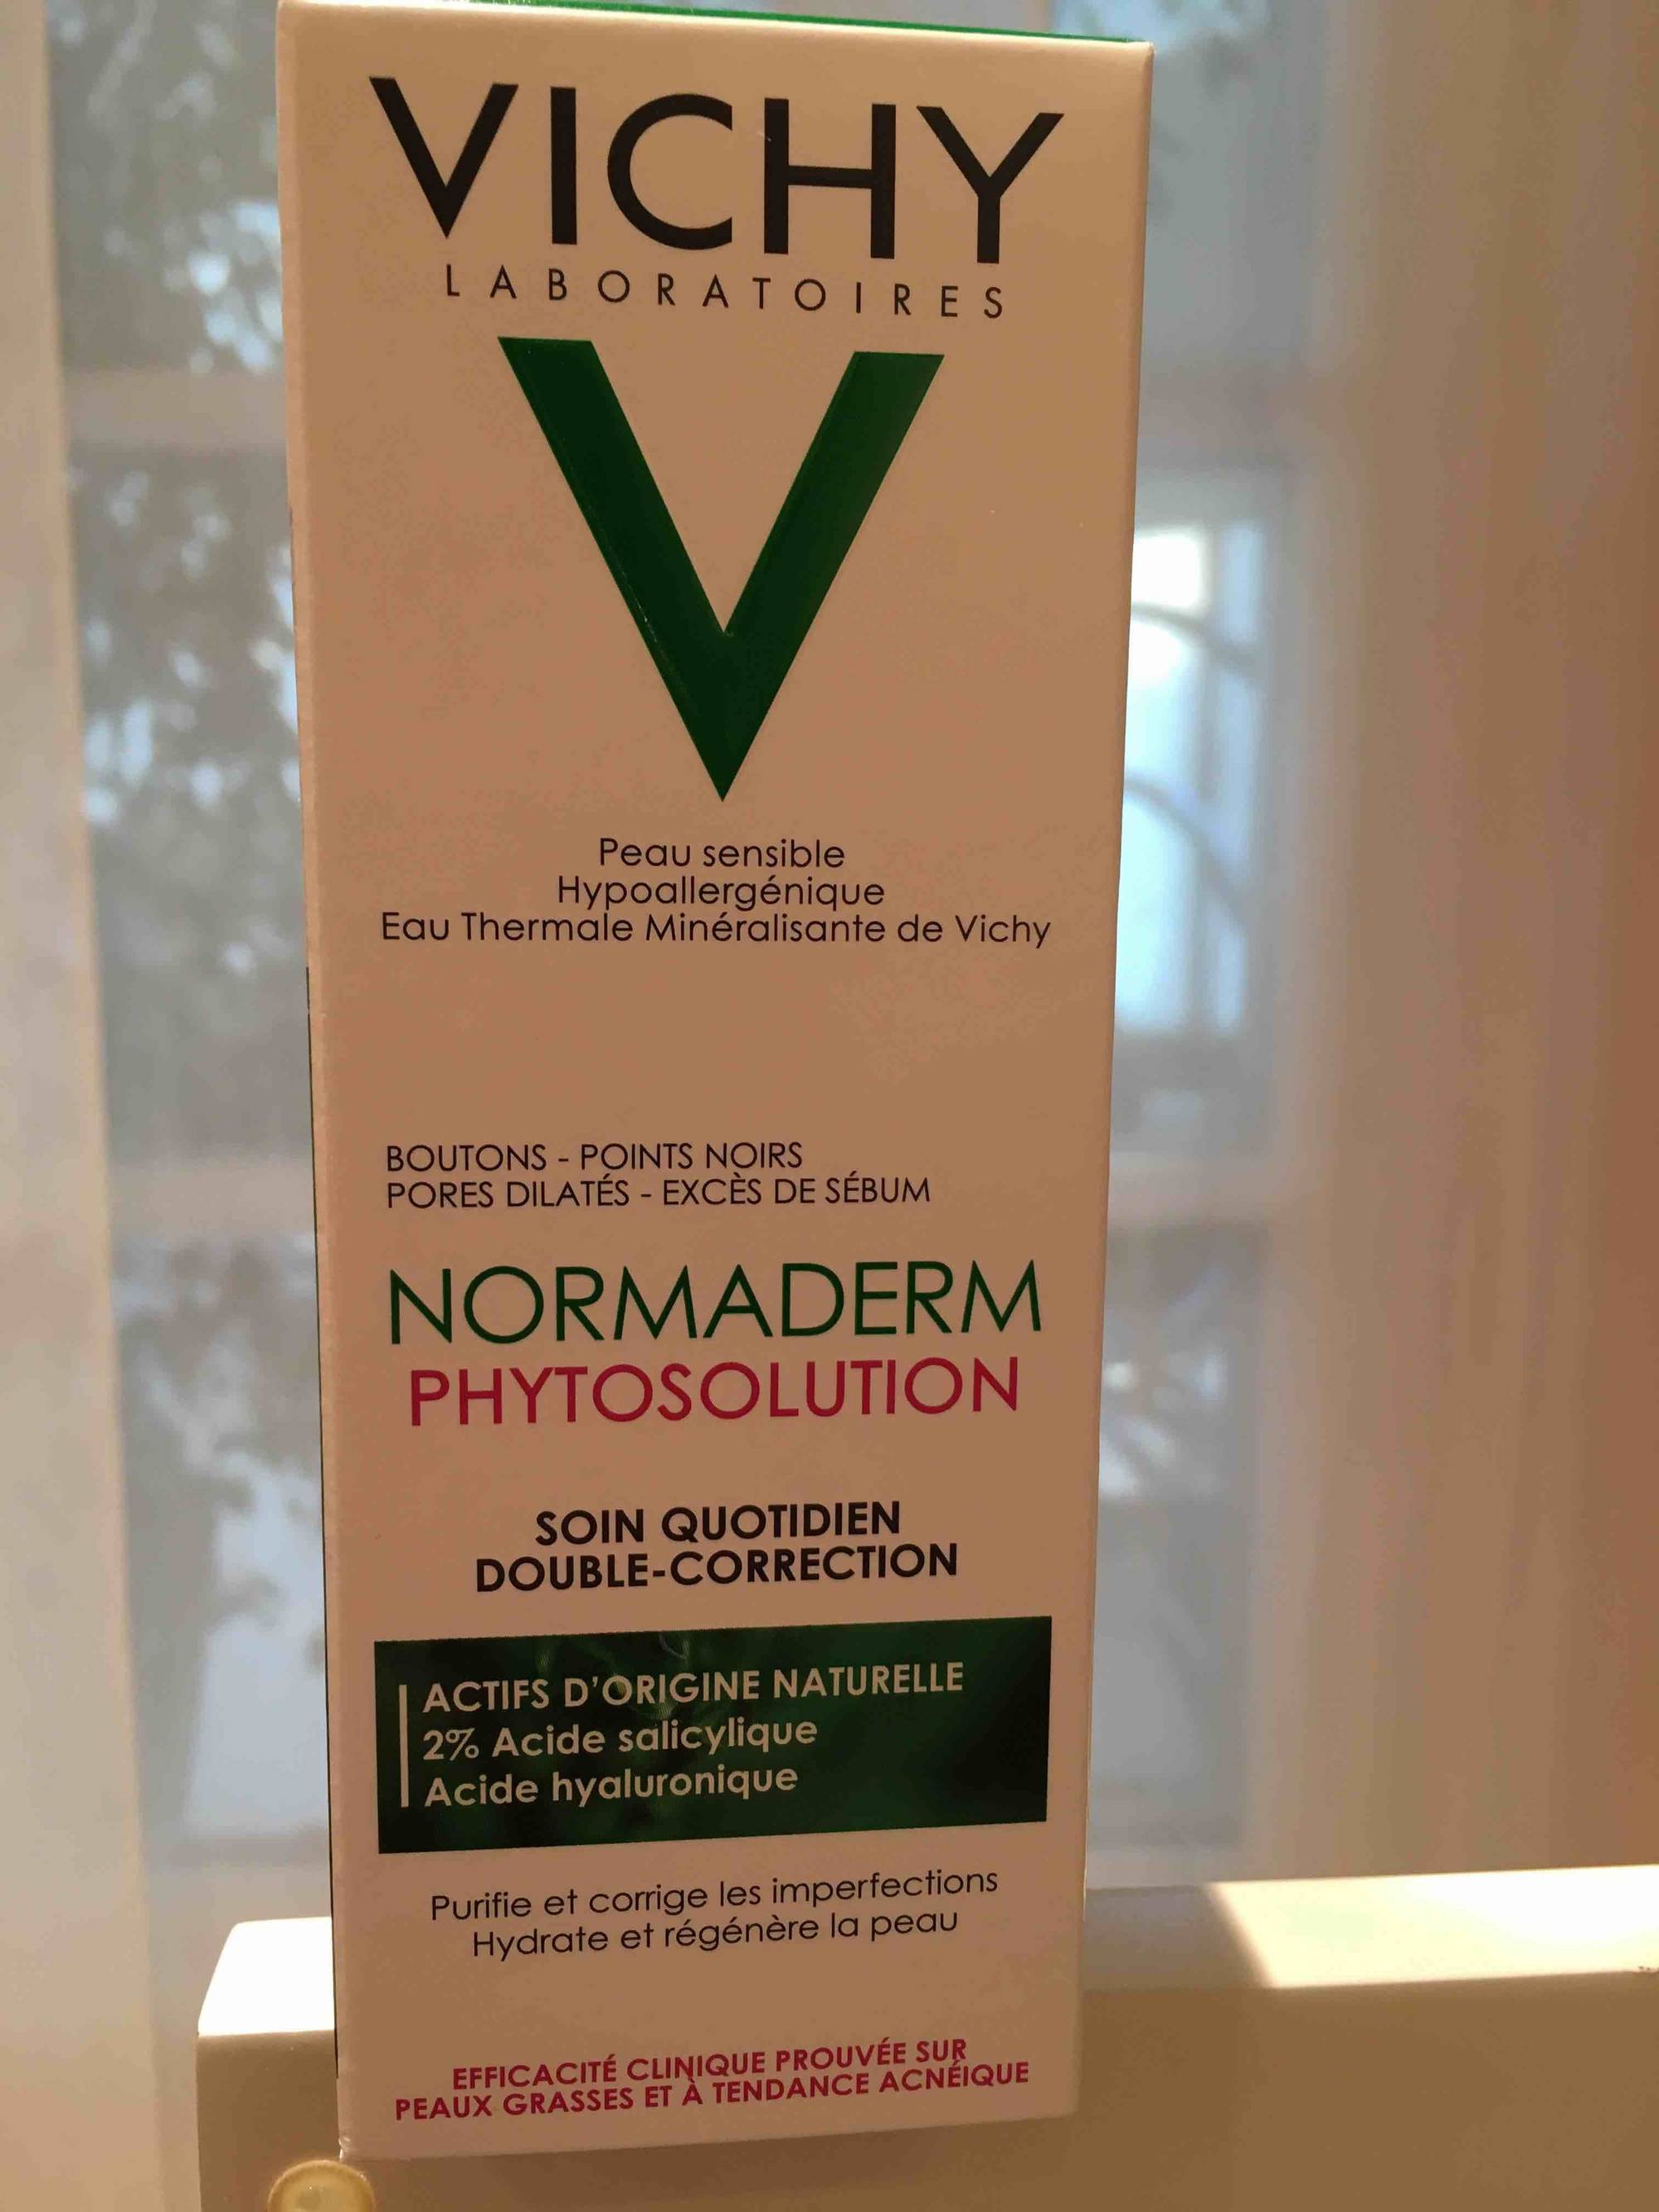 VICHY - Normaderm phytosolution - Soin quotidien double-correction